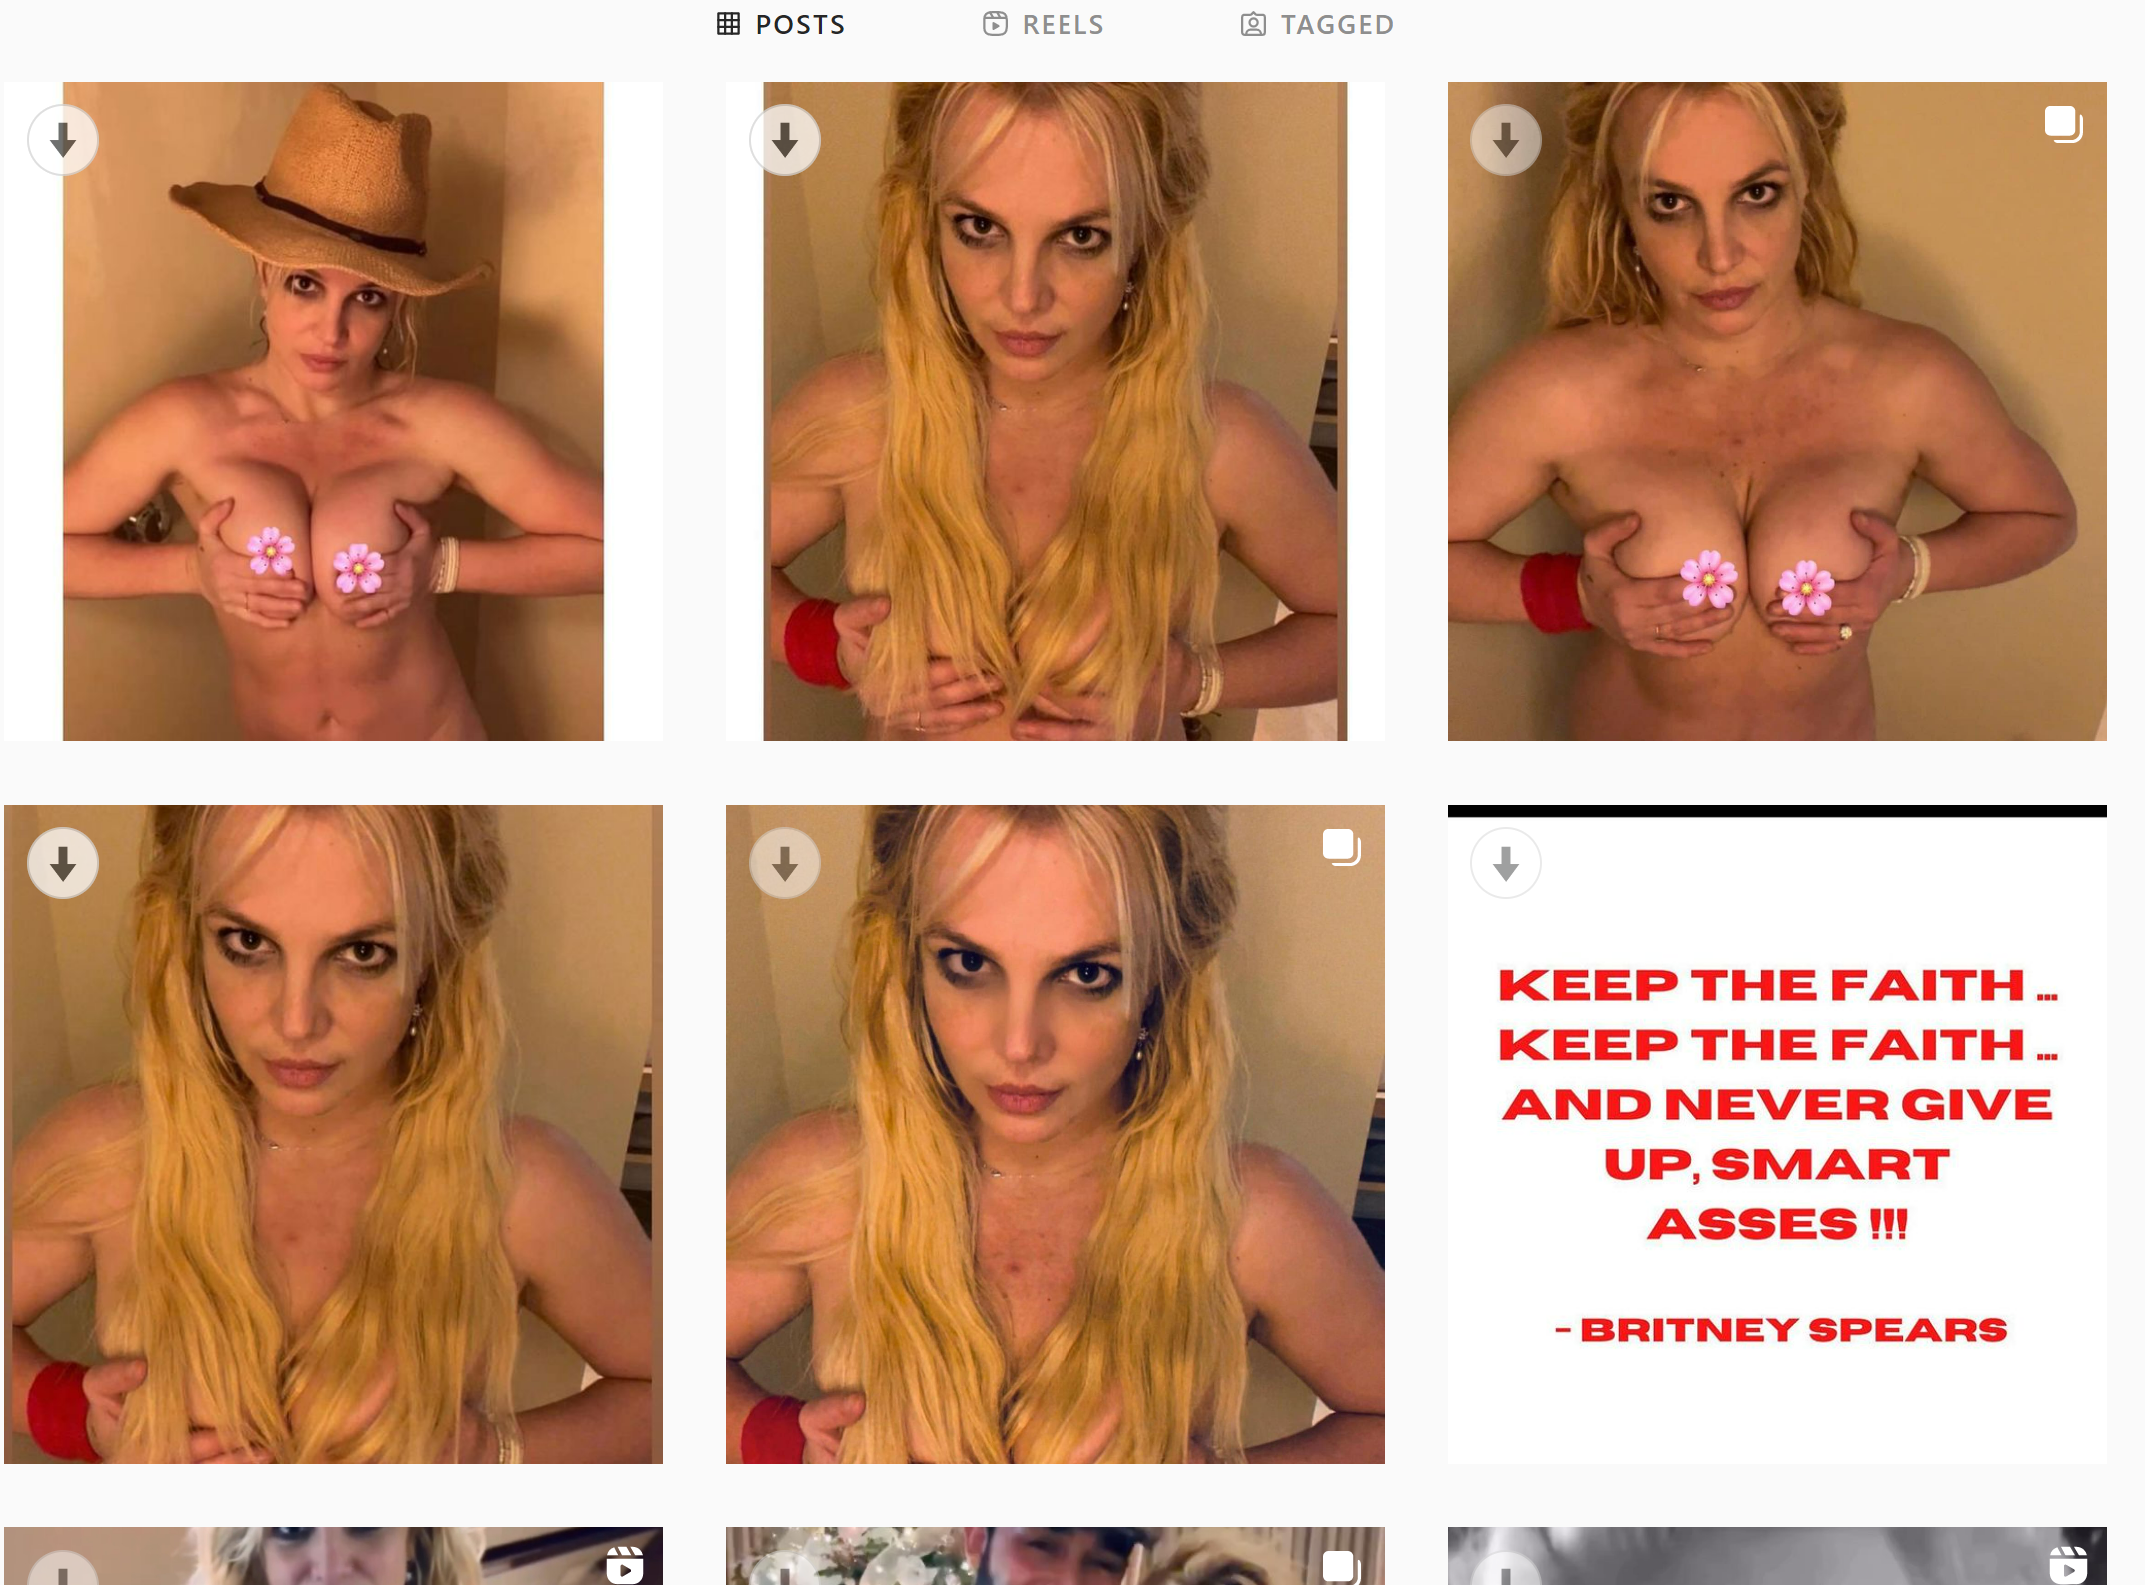 Britney Spears posted and deleted several topless photos while talking about "self-worth"